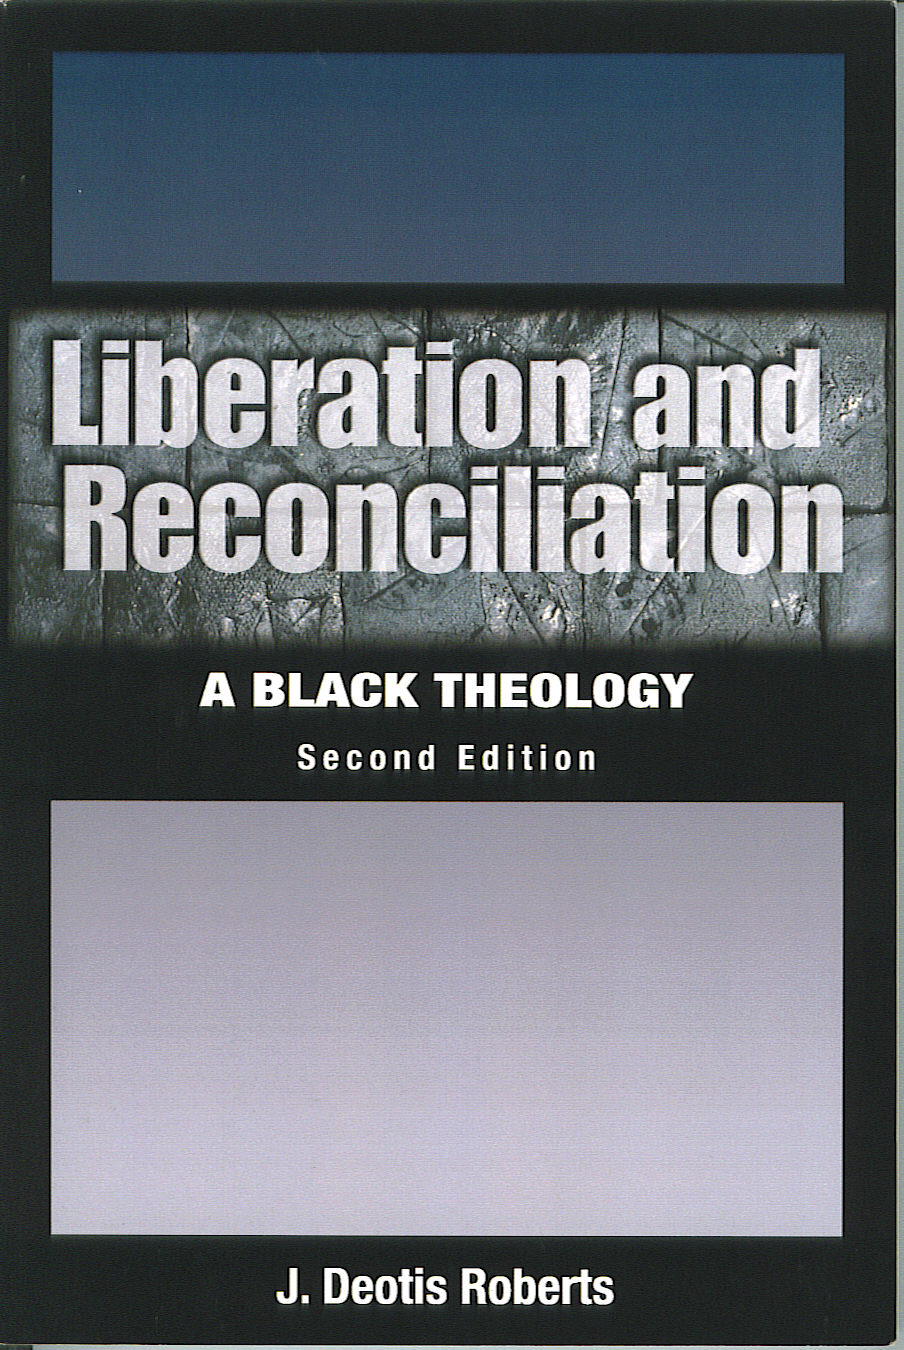 [Liberation+and+Reconciliation.jpg]